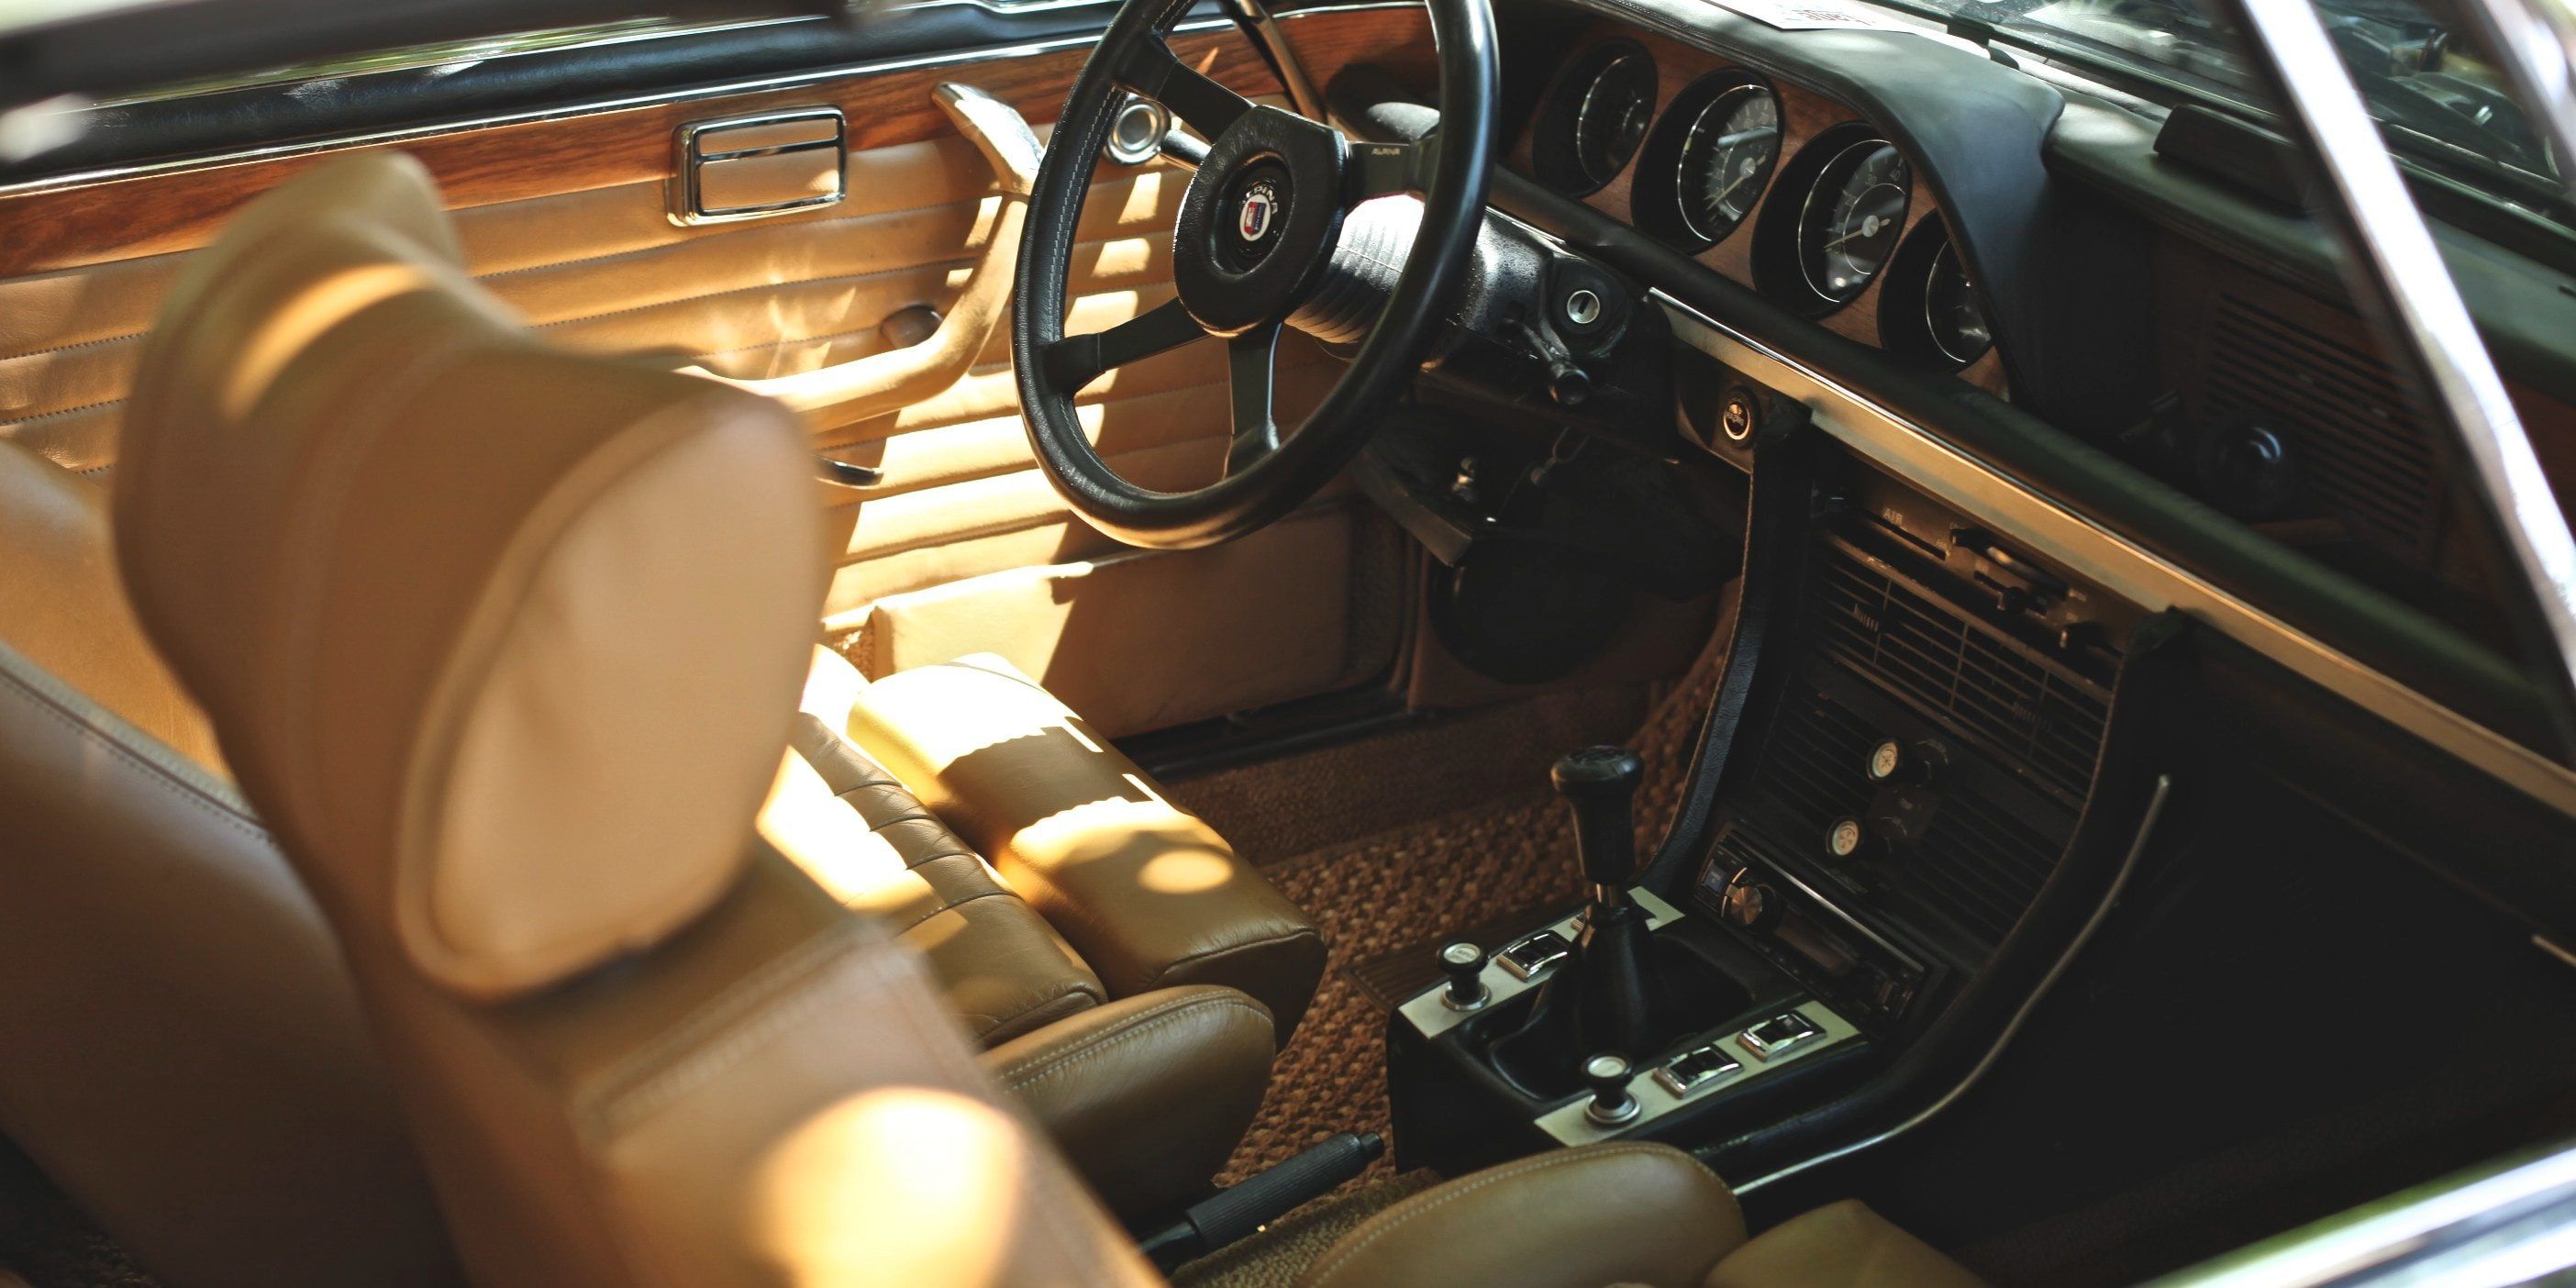 Cleaning Car Interiors: How to Get the Inside Completely Spotless